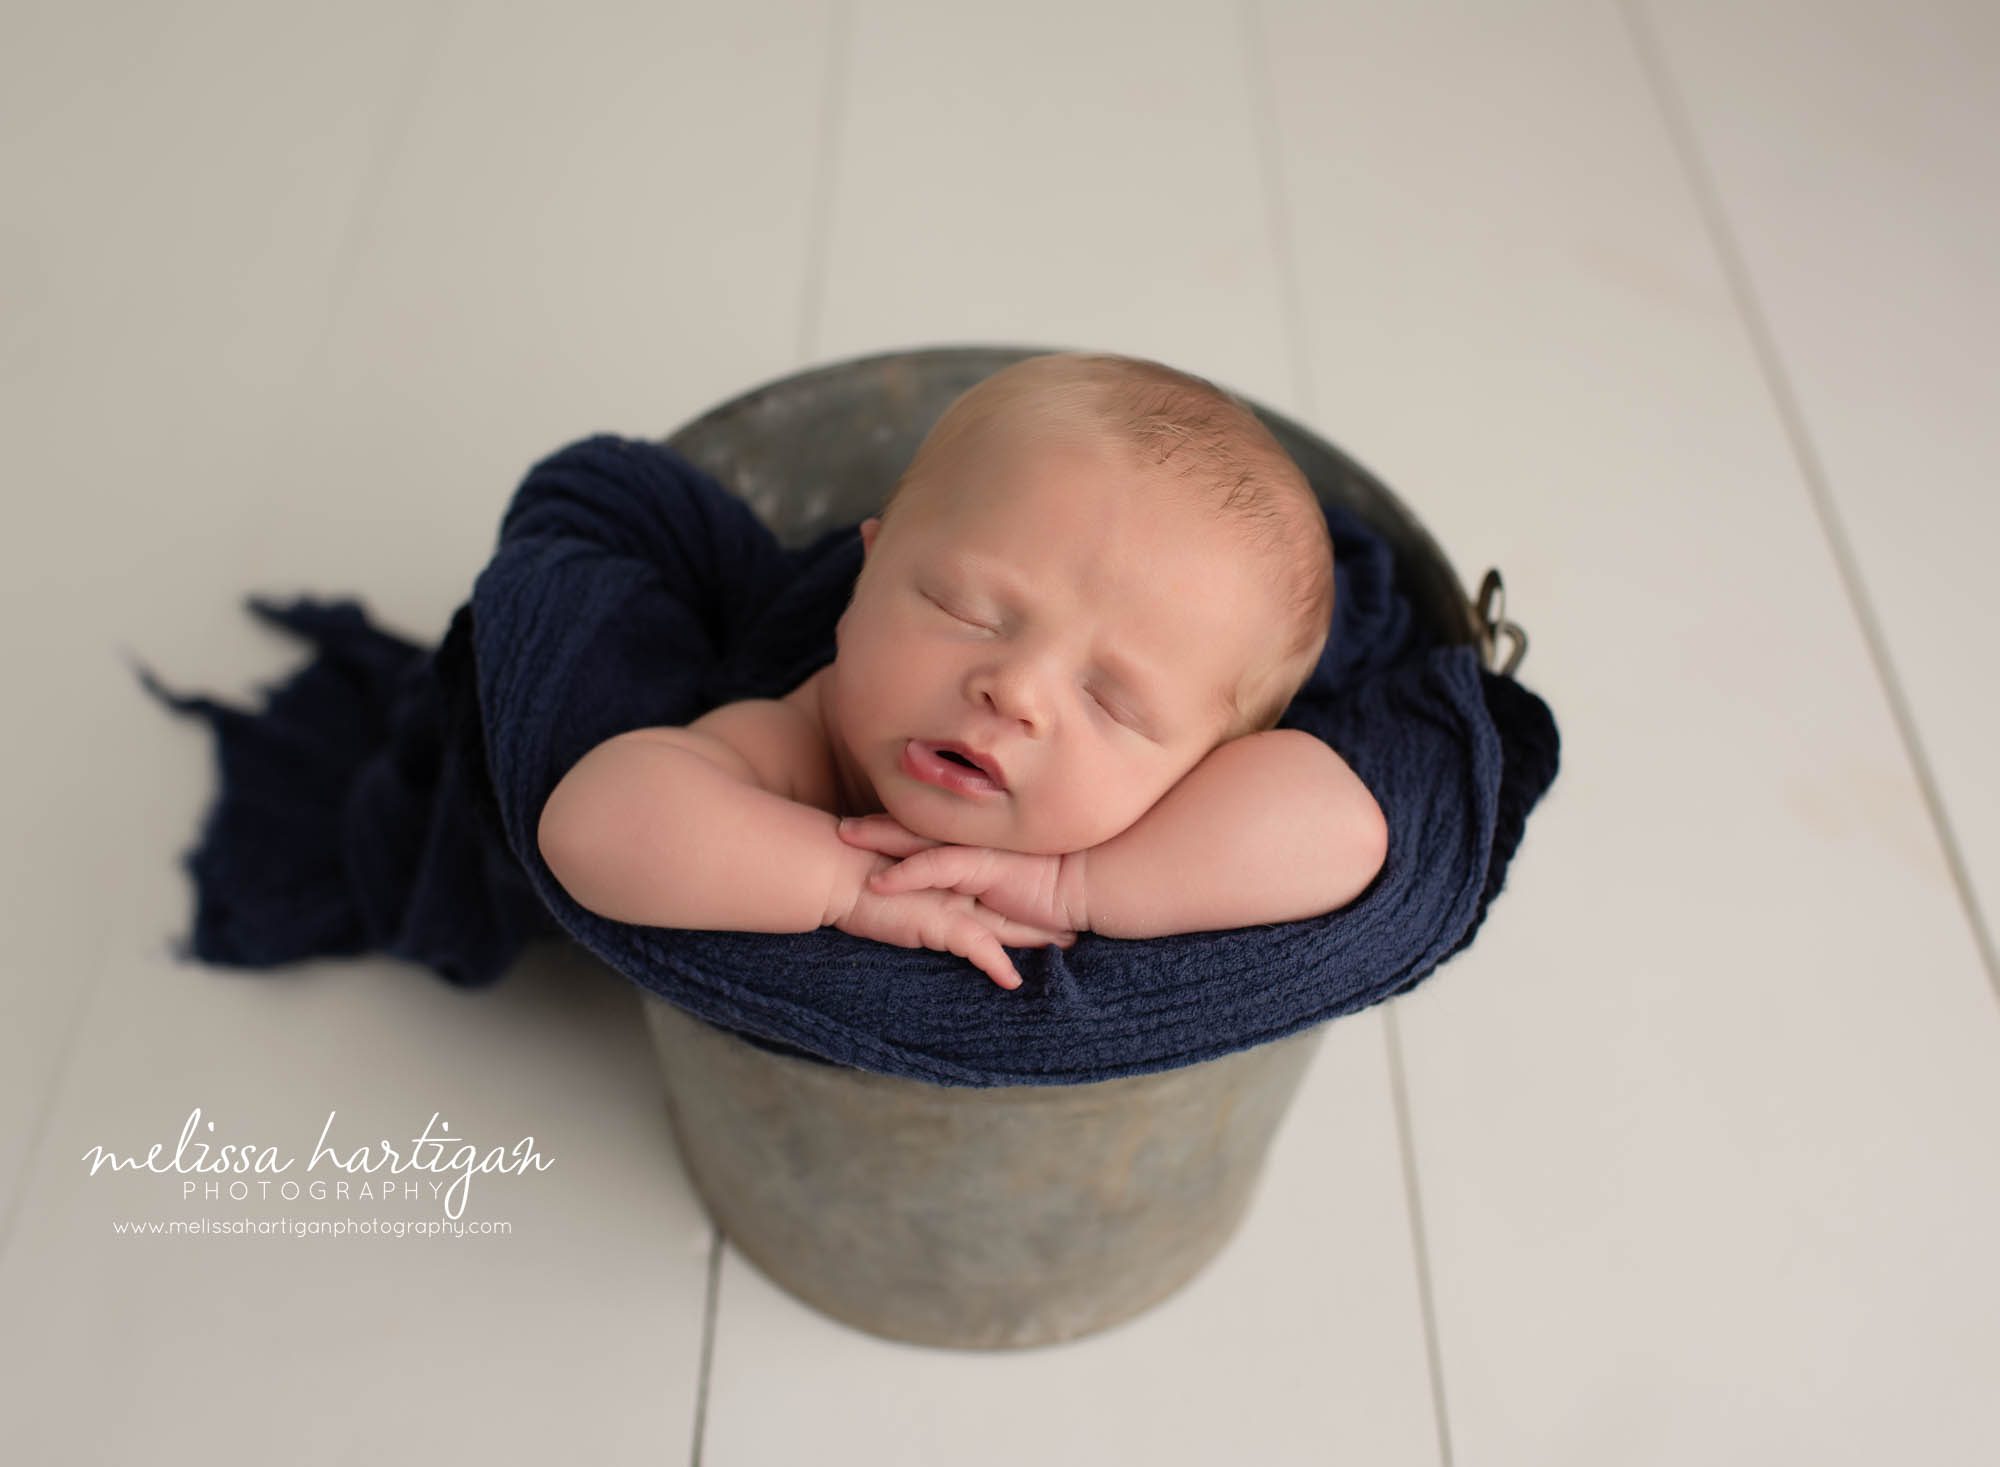 Baby boy posed in metal bucket with navy blue wrap